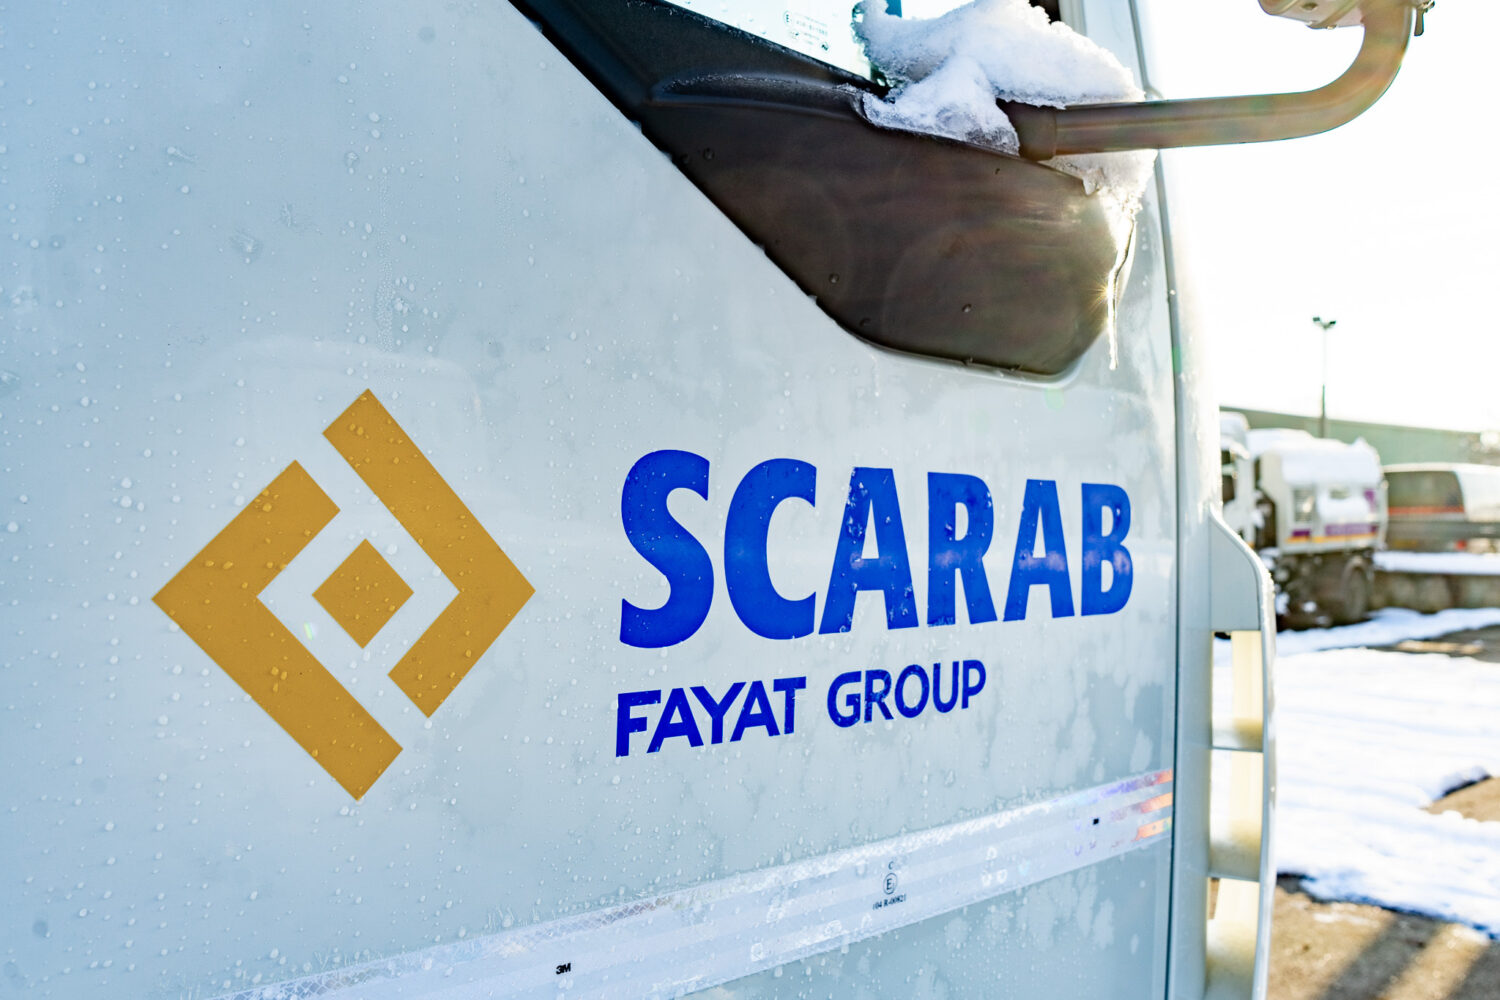 Scarab's 'Best Practice' Guide to Winter Maintenance